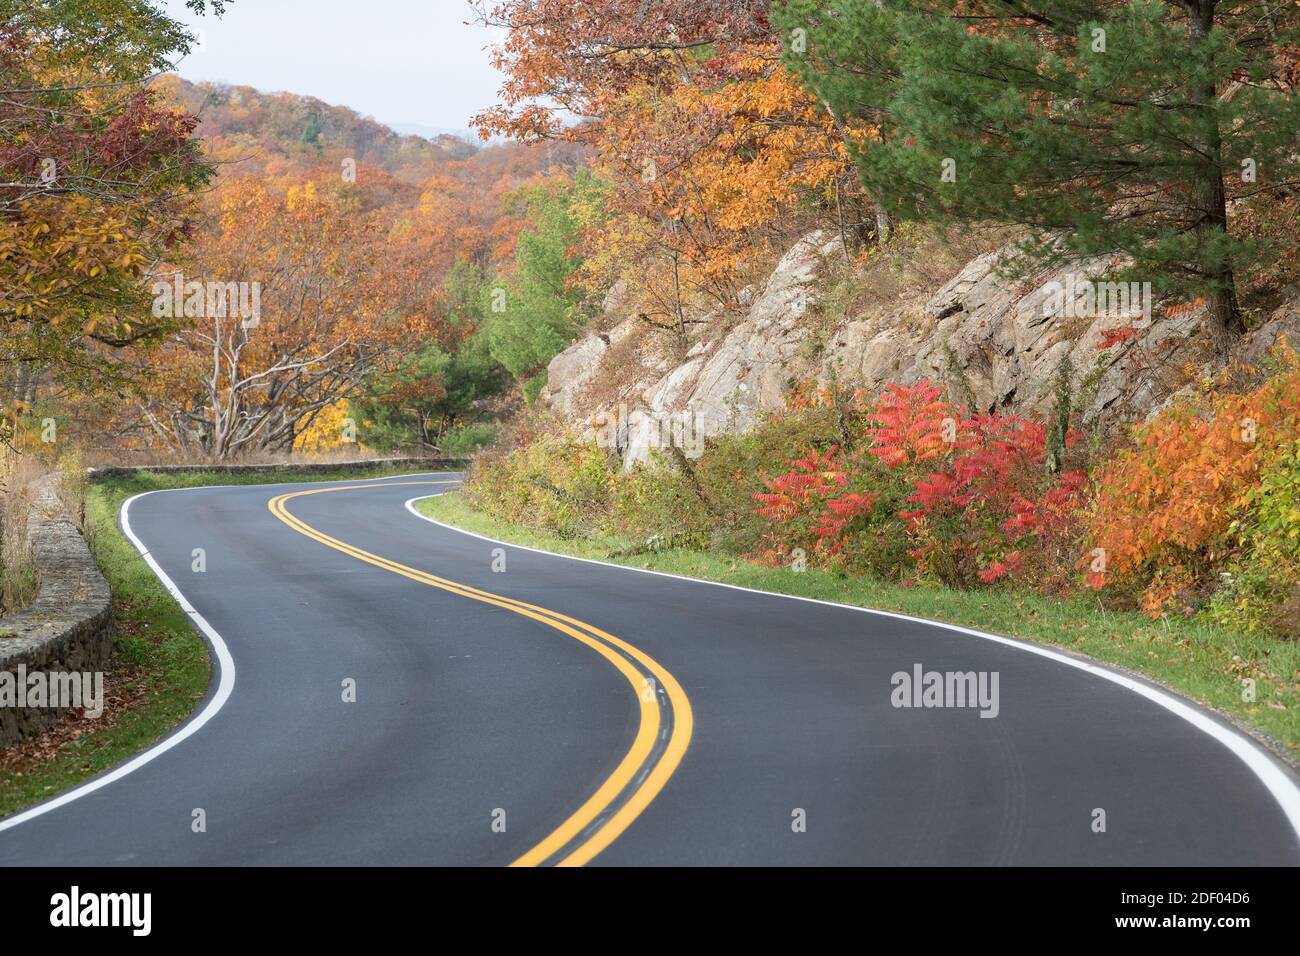 Skyline drive is a scenic drive along the Blue Ridge Mountains in Shenandoah National Park. Stock Photo